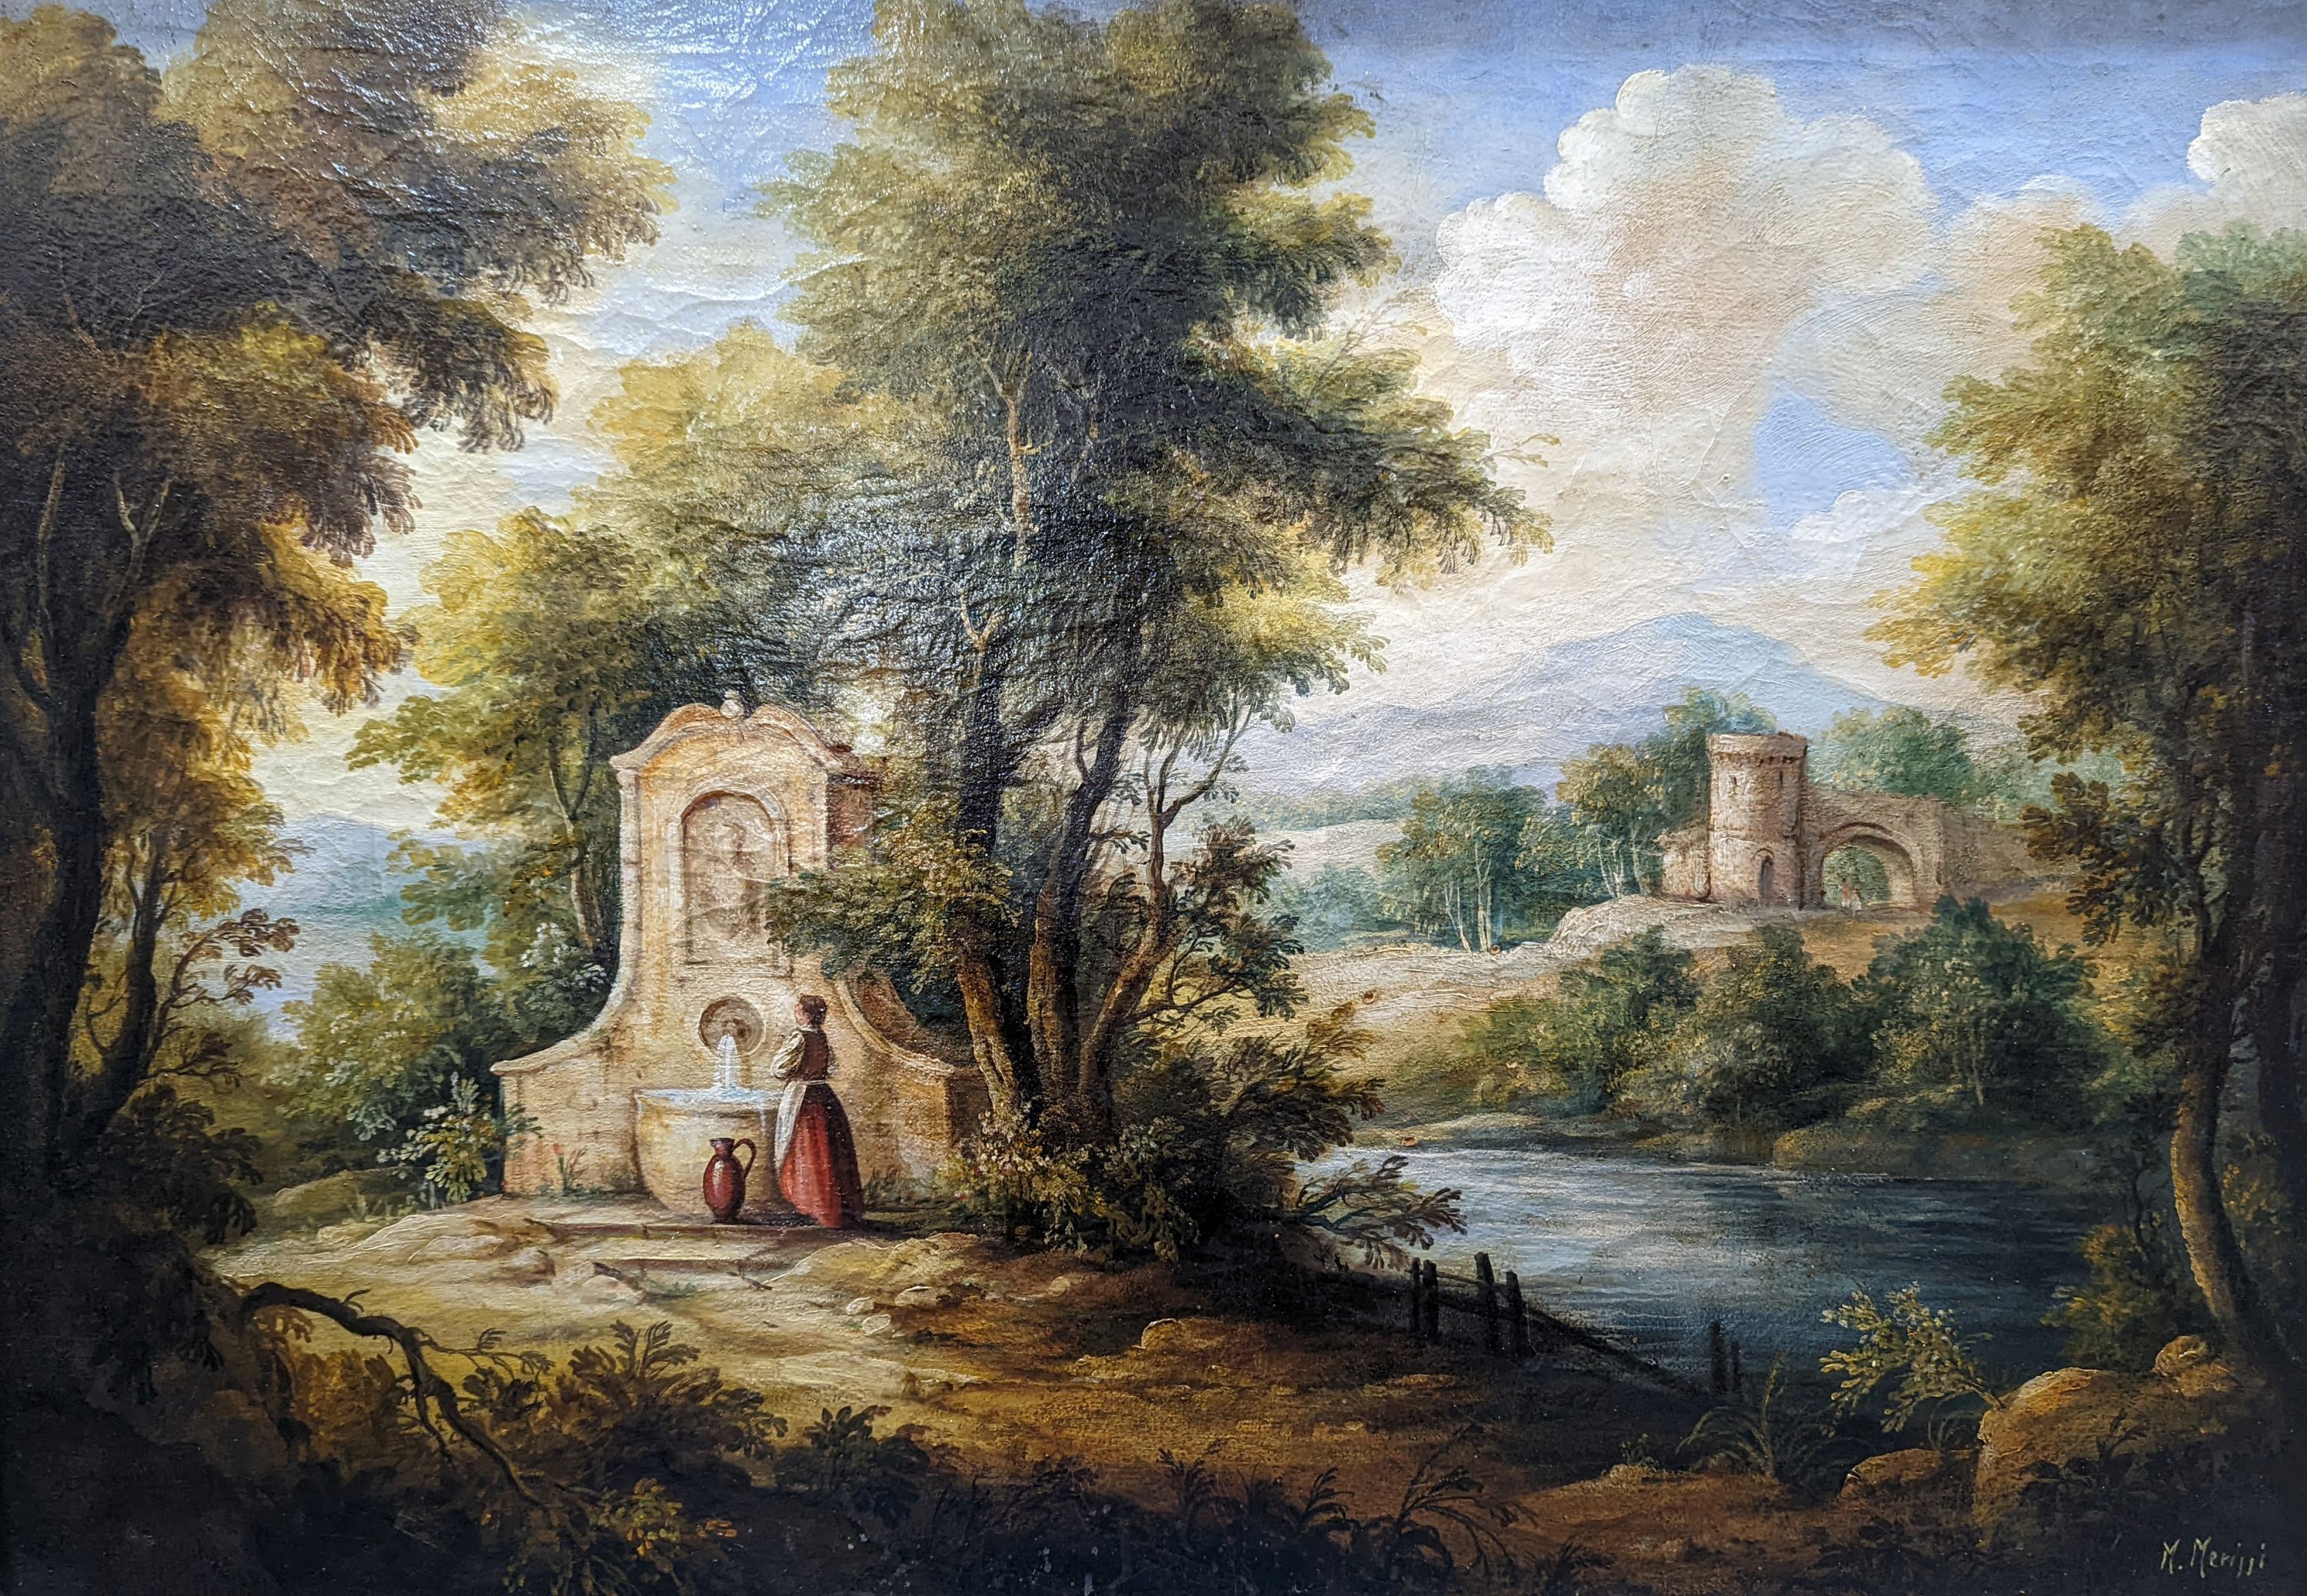 M. Merini, oil on canvas, Italianate landscape with woman beside a well, signed, 68 x 98cm